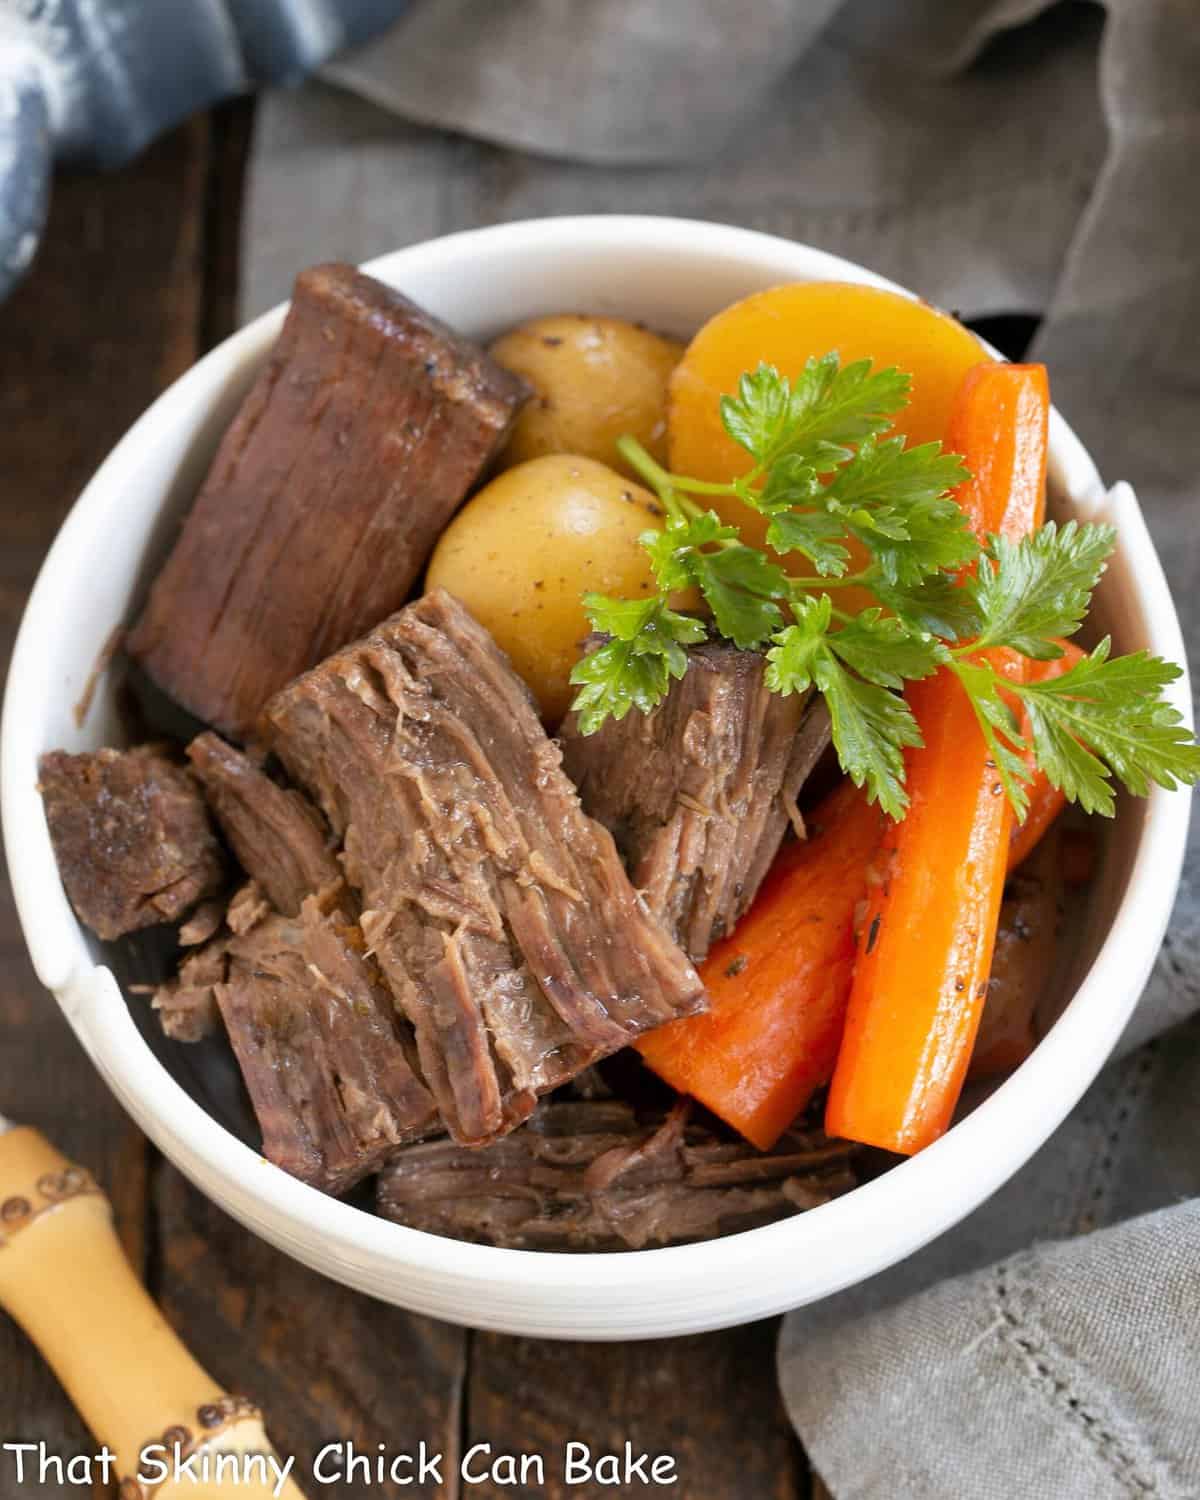 Beef Chuck Roast dished out into a white bowl with carrots and potatoes.